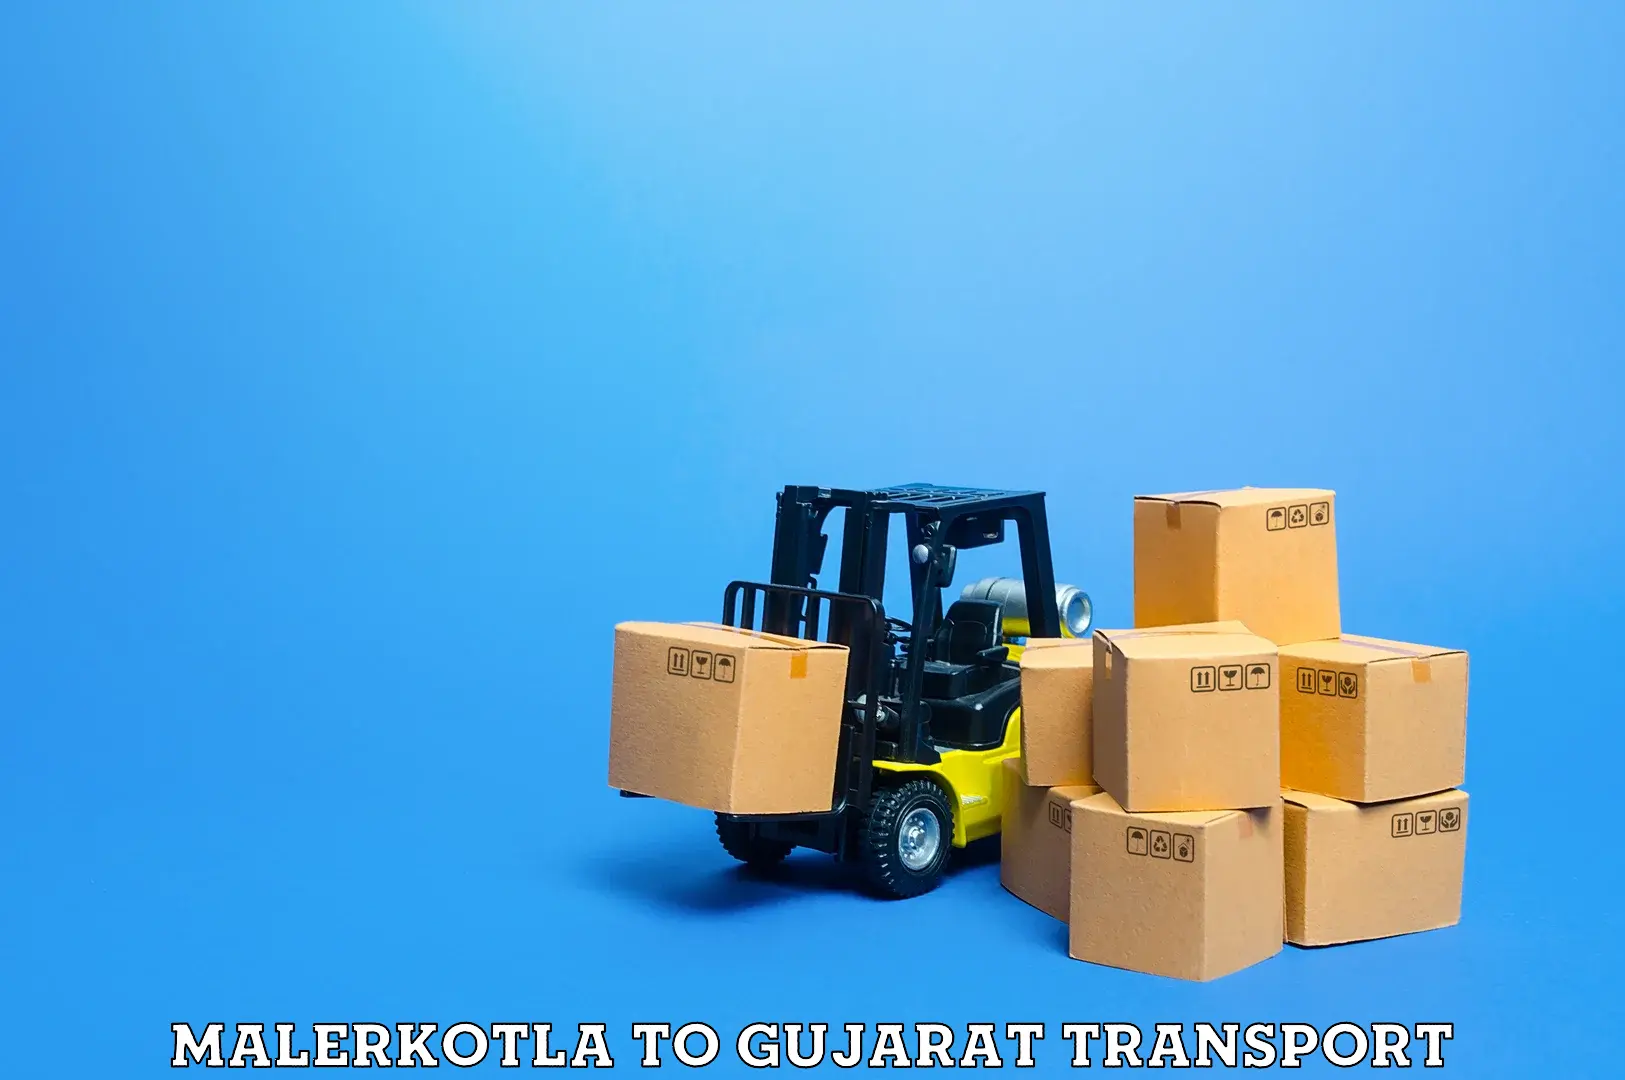 Truck transport companies in India Malerkotla to Songadh